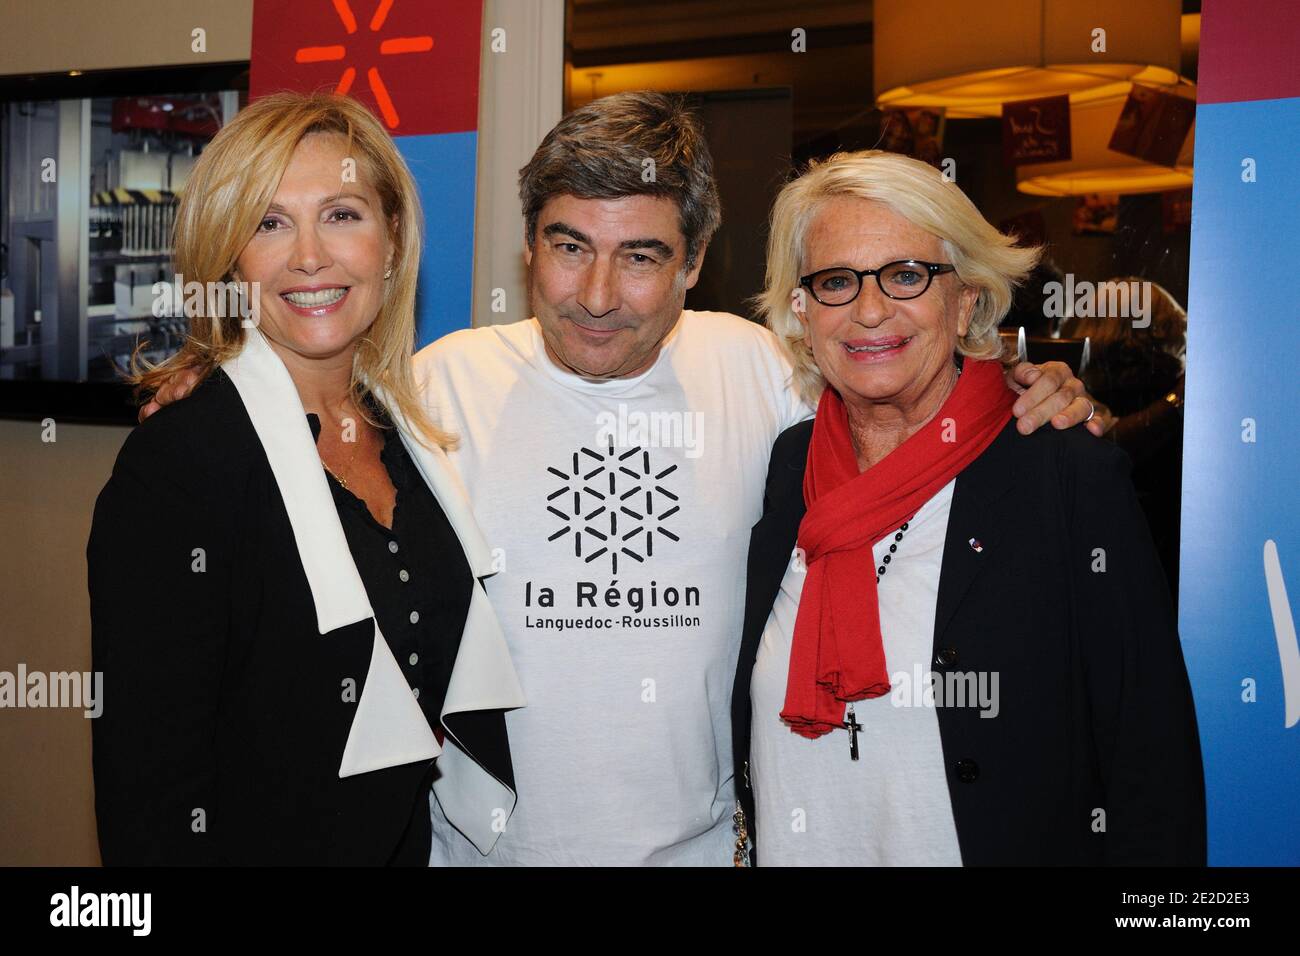 EXCLUSIVE - Patrice Drevet, Fabienne Amiach, Veronique de VIllele attending the promoting party for Languedoc-Roussillon held at the Press Club de France in Paris, France, on October 20, 2011. Photo by Alban Wyters/ABACAPRESS.COM Stock Photo